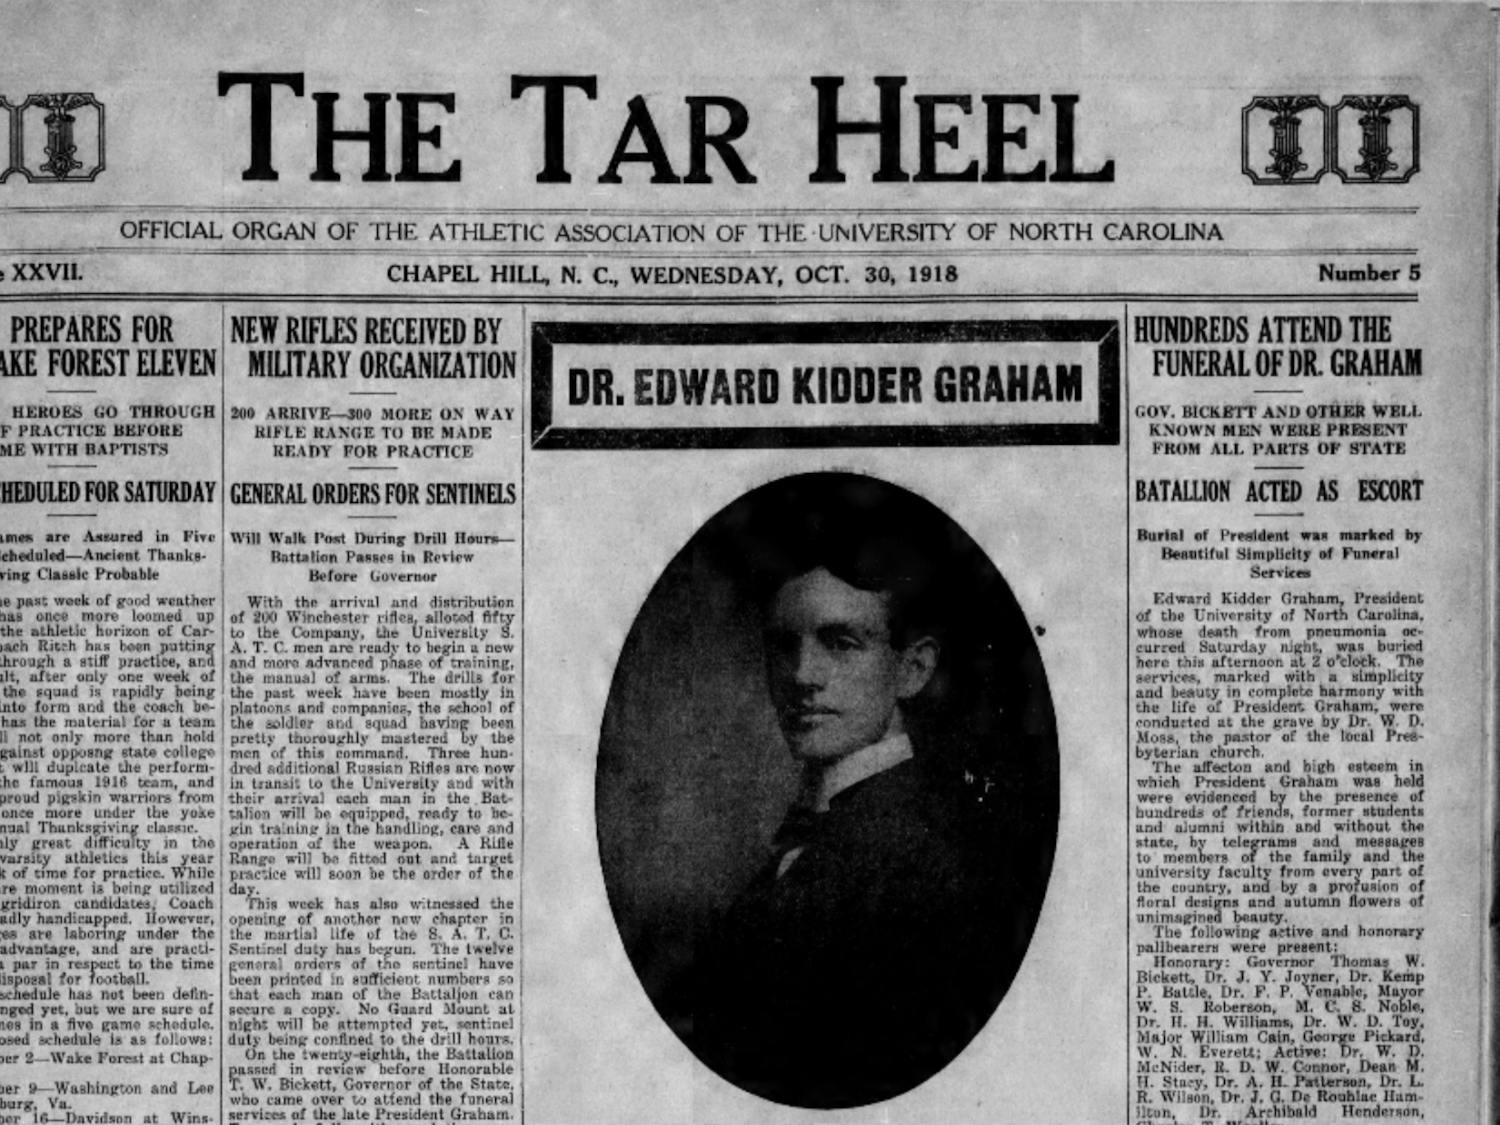 The front page of The Daily Tar Heel, then called The Tar Heel, on Oct. 30, 1918. The influenza pandemic killed seven people at UNC, including University President Edward Kidder Graham.